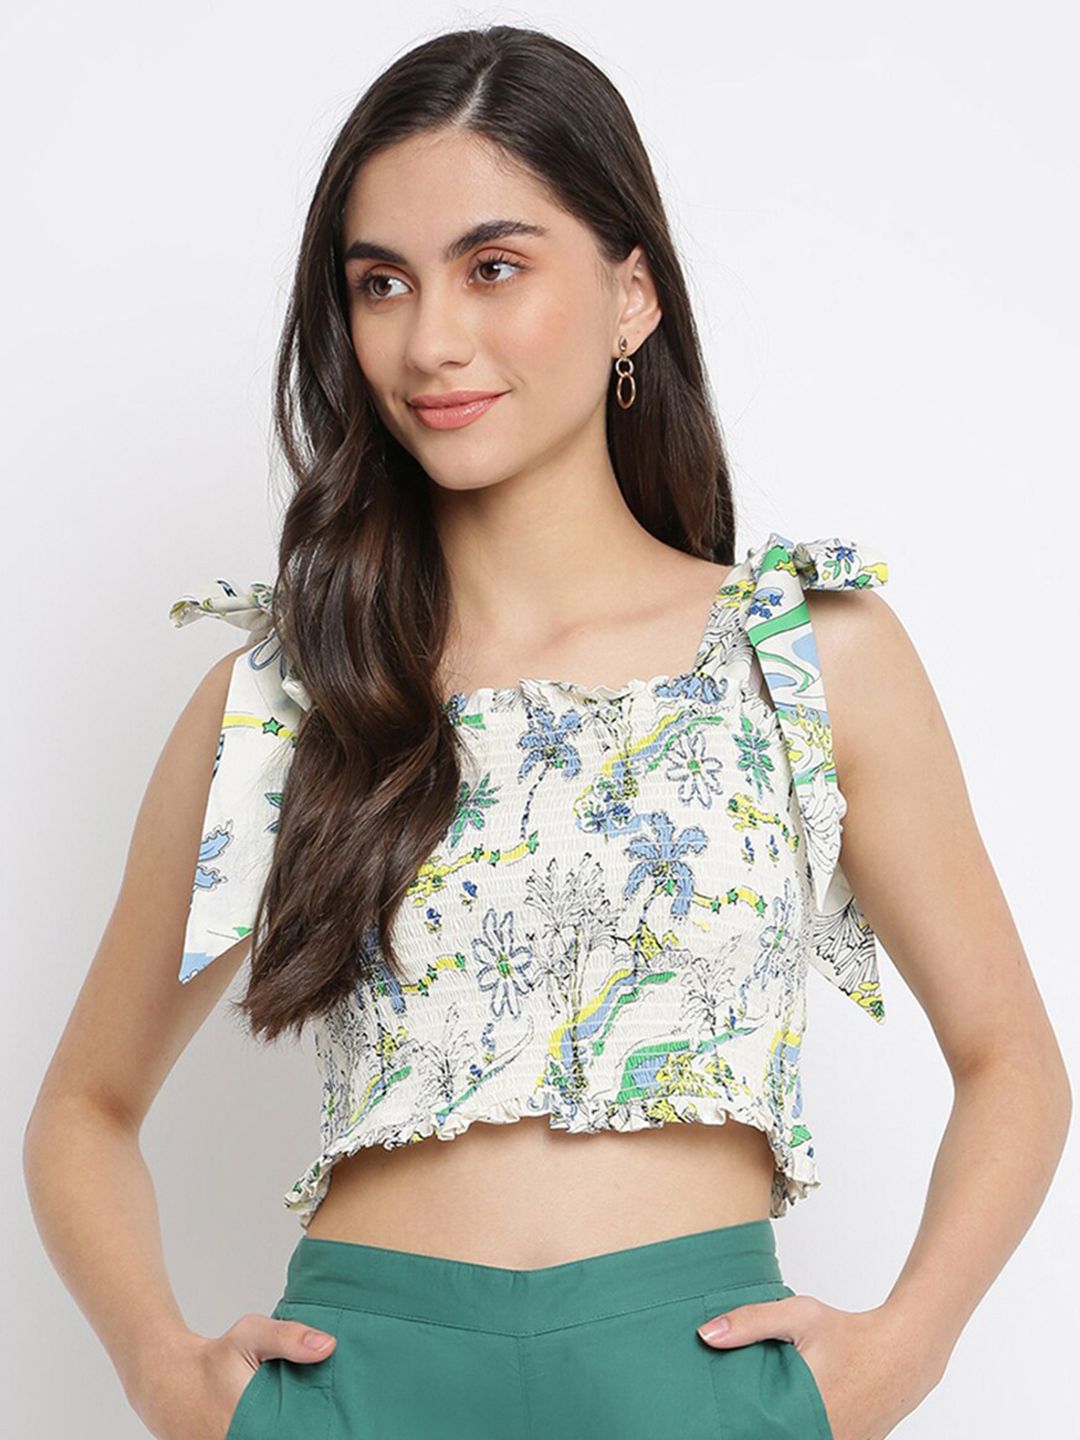 Fabindia Women Off White & Blue Floral Print Crop Top Price in India